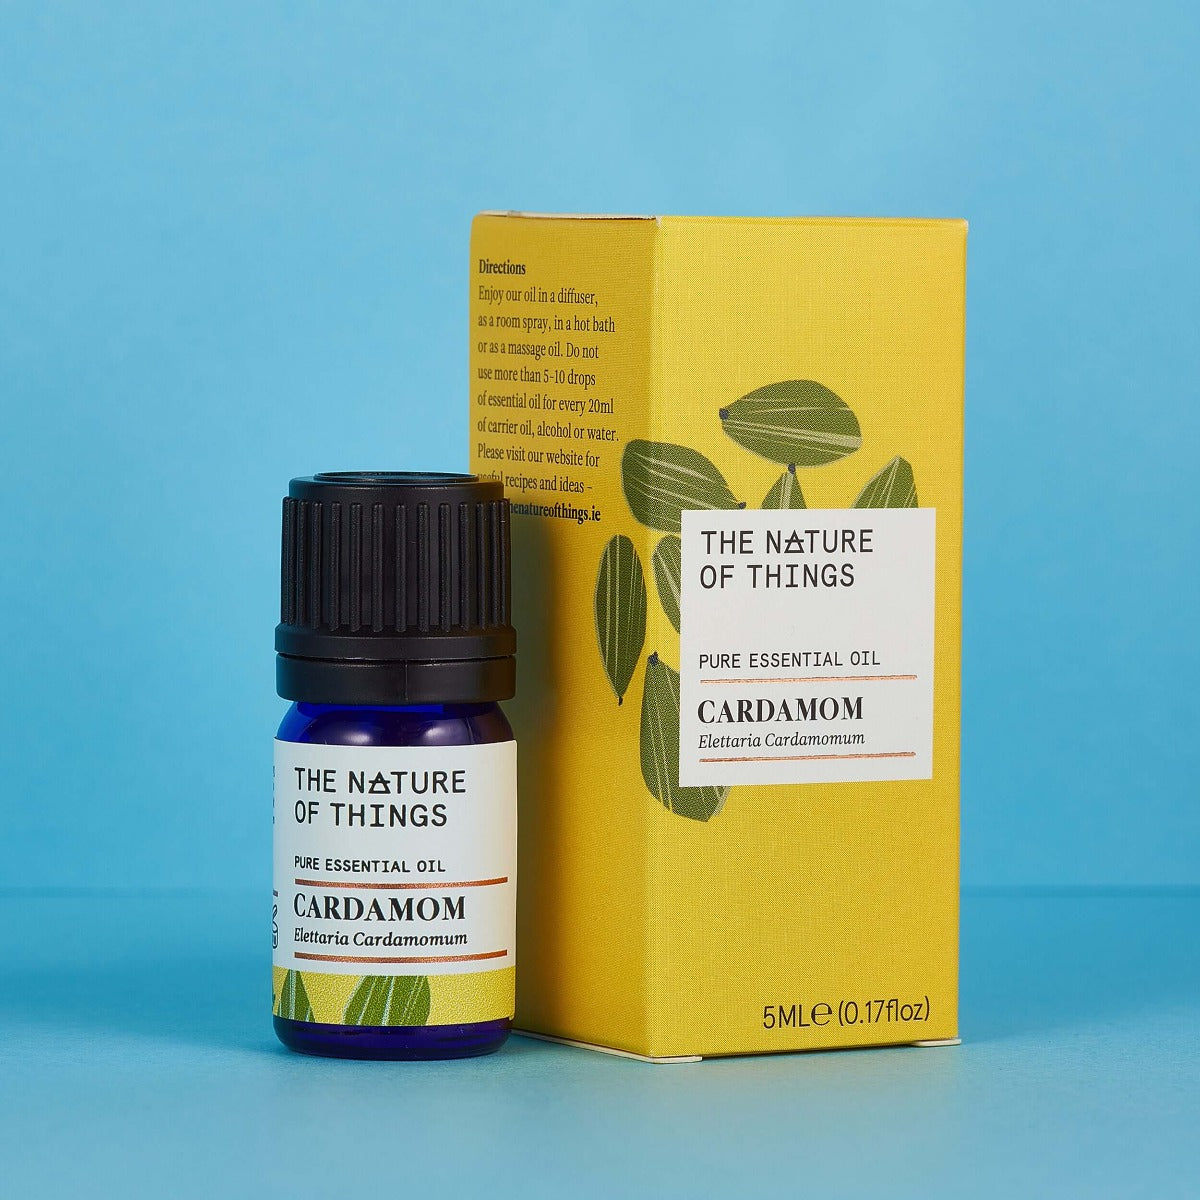 Cardamom Essential Oil from The Nature of Things